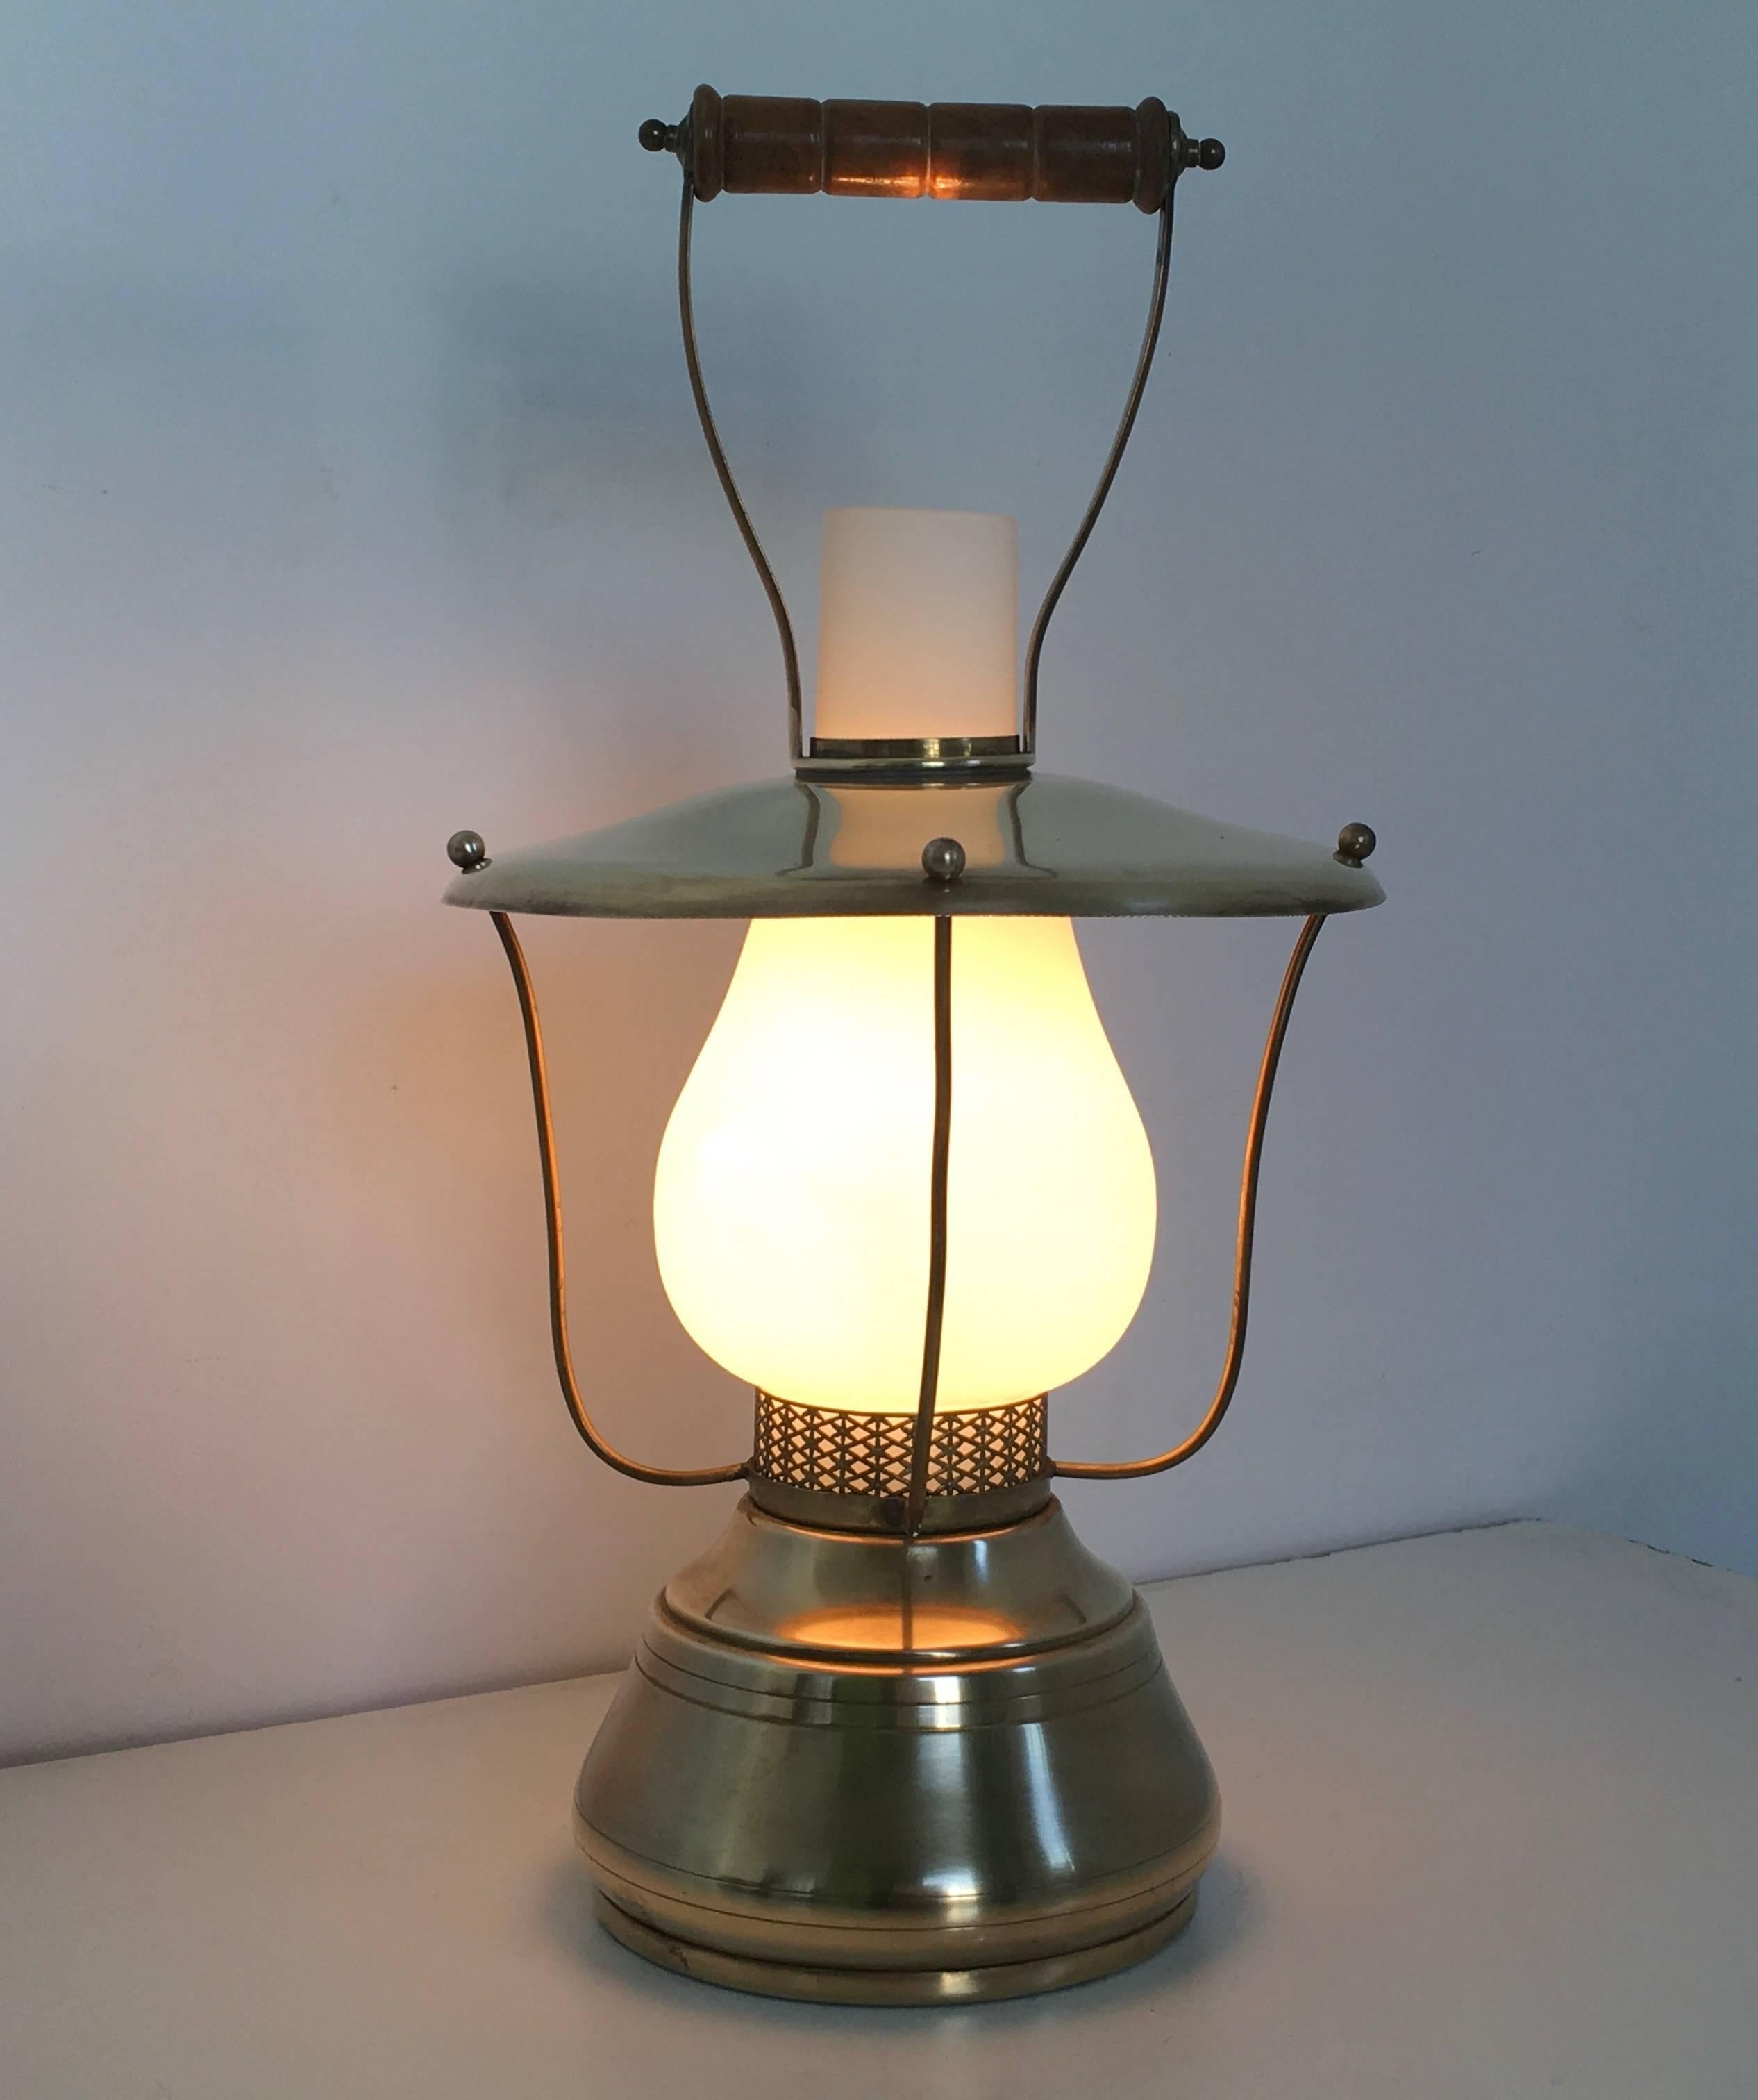 Made in Italy, 1950.
This lantern is made in brass, white encased glass and features a turned wood handle. 
It is a vintage piece, therefore it might show slight traces of use, but it can be considered as in perfect condition and ready to give